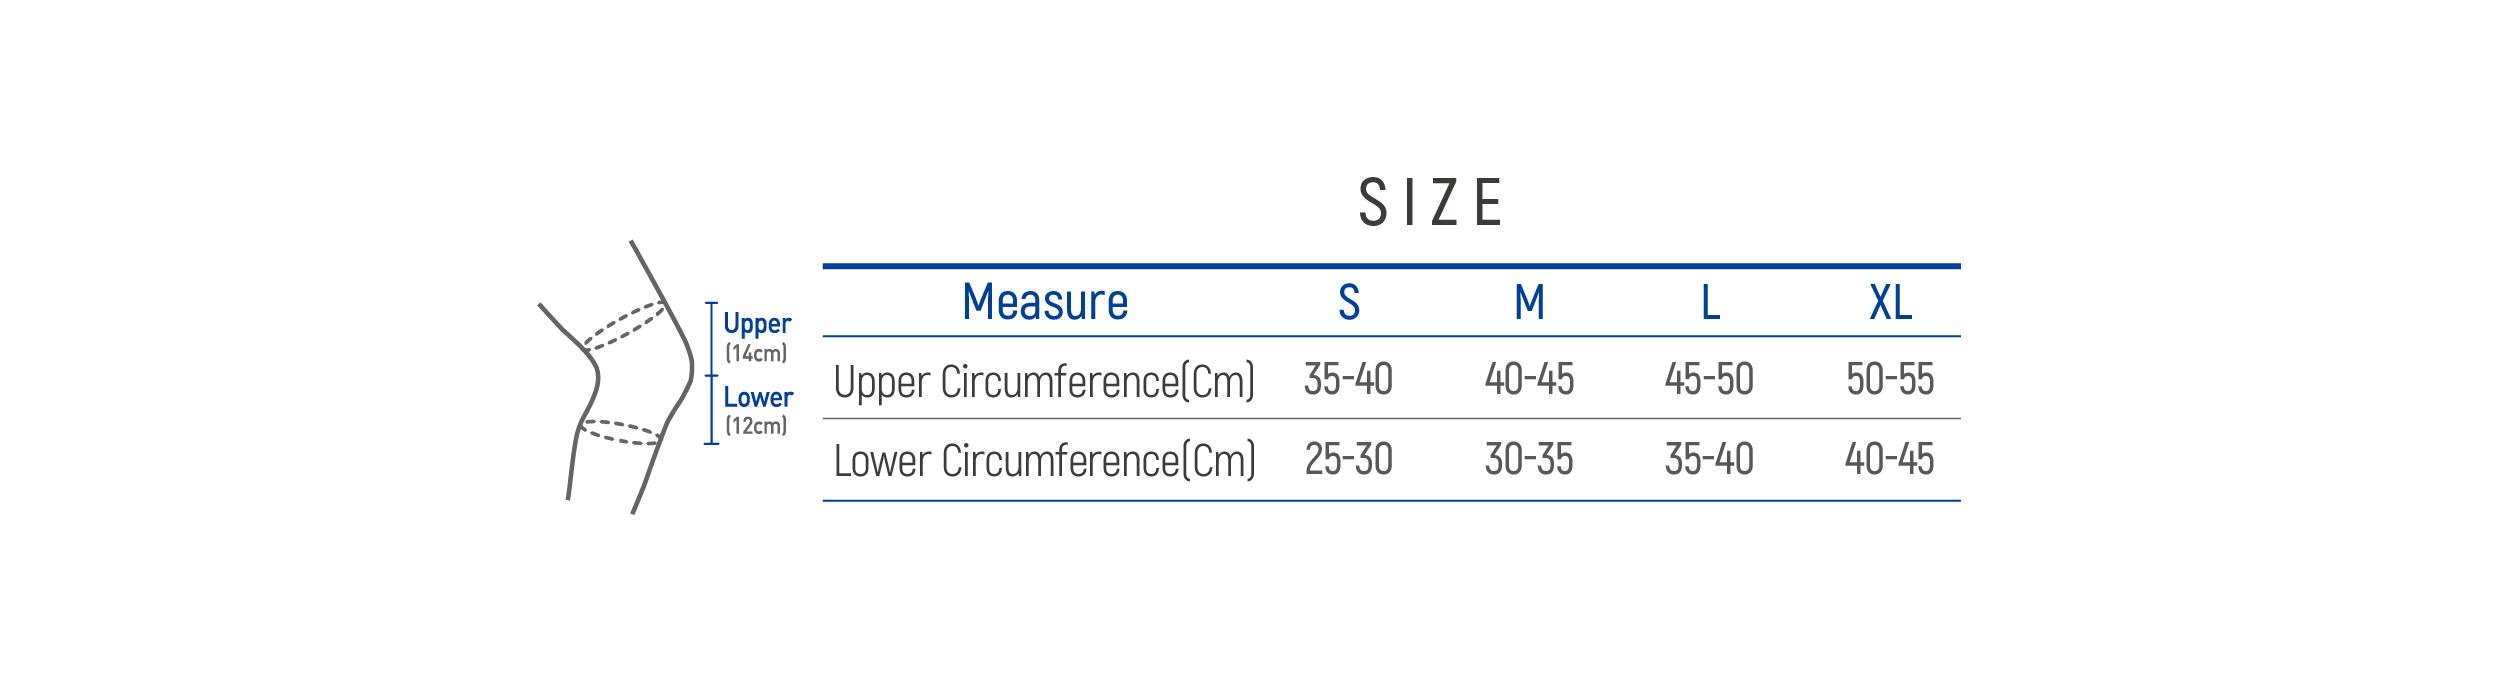 DR-K055 Size table image